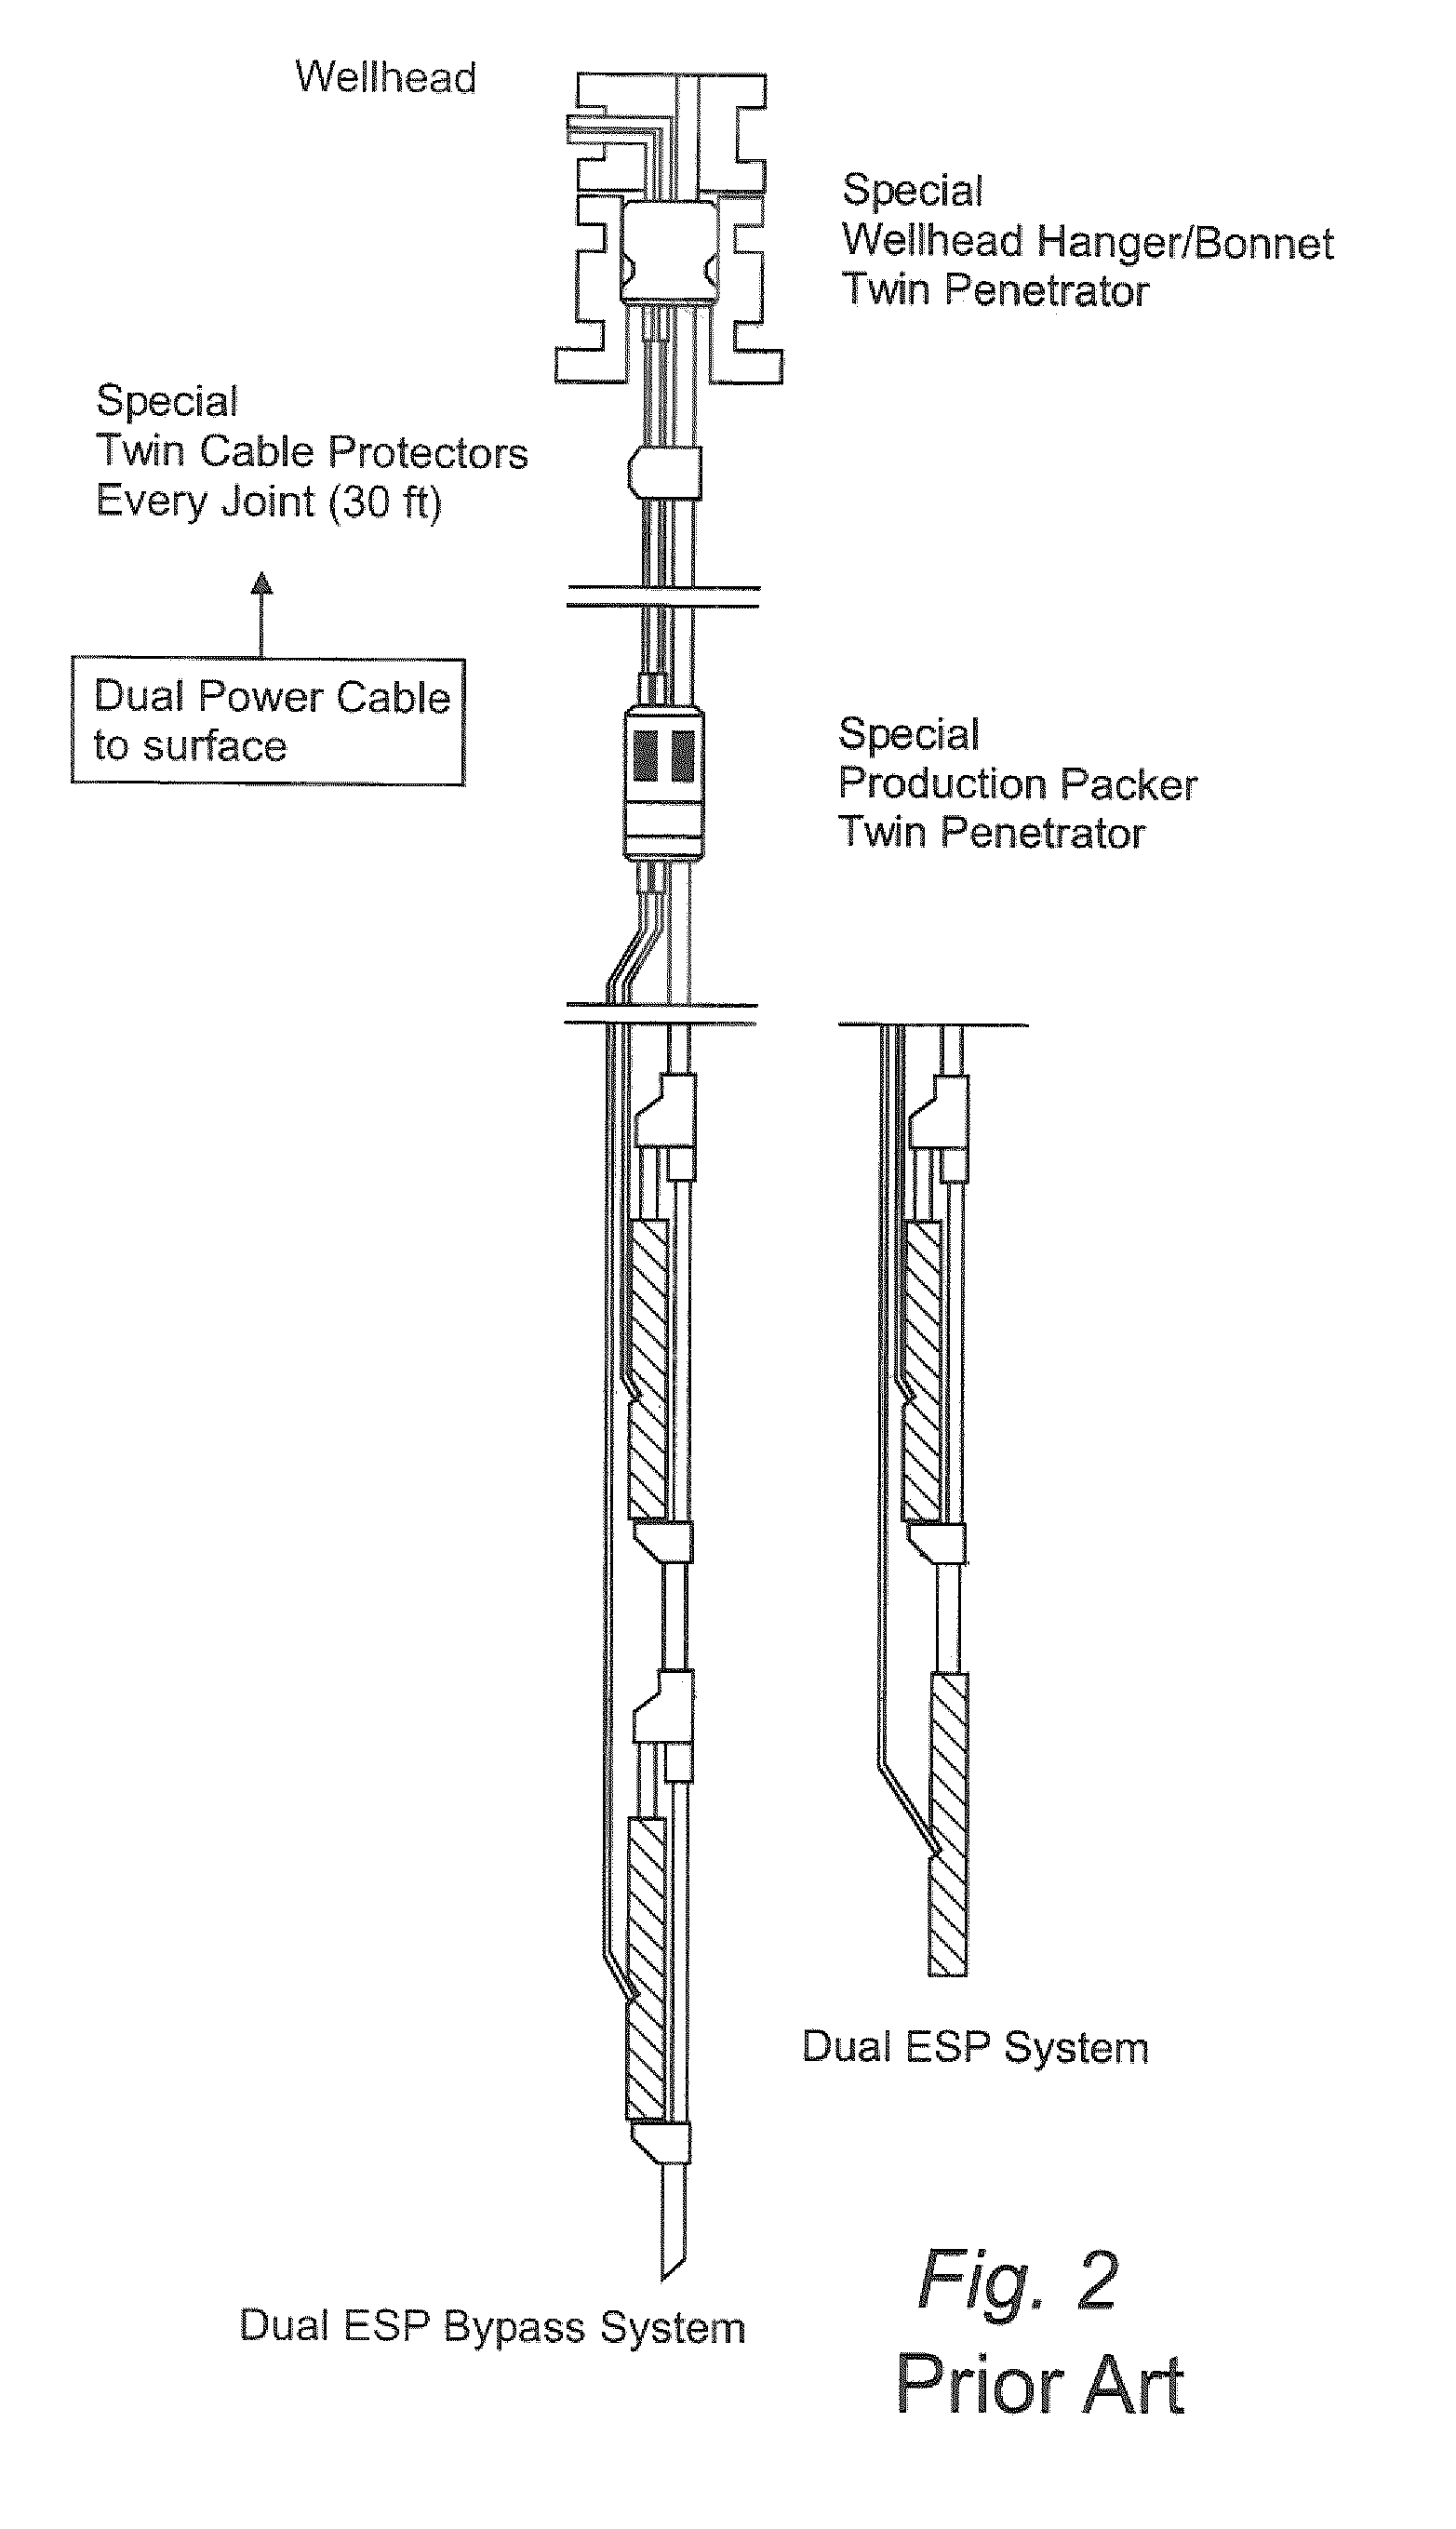 Switch mechanisms that allow a single power cable to supply electrical power to two or more downhole electrical motors alternatively and methods associated therewith